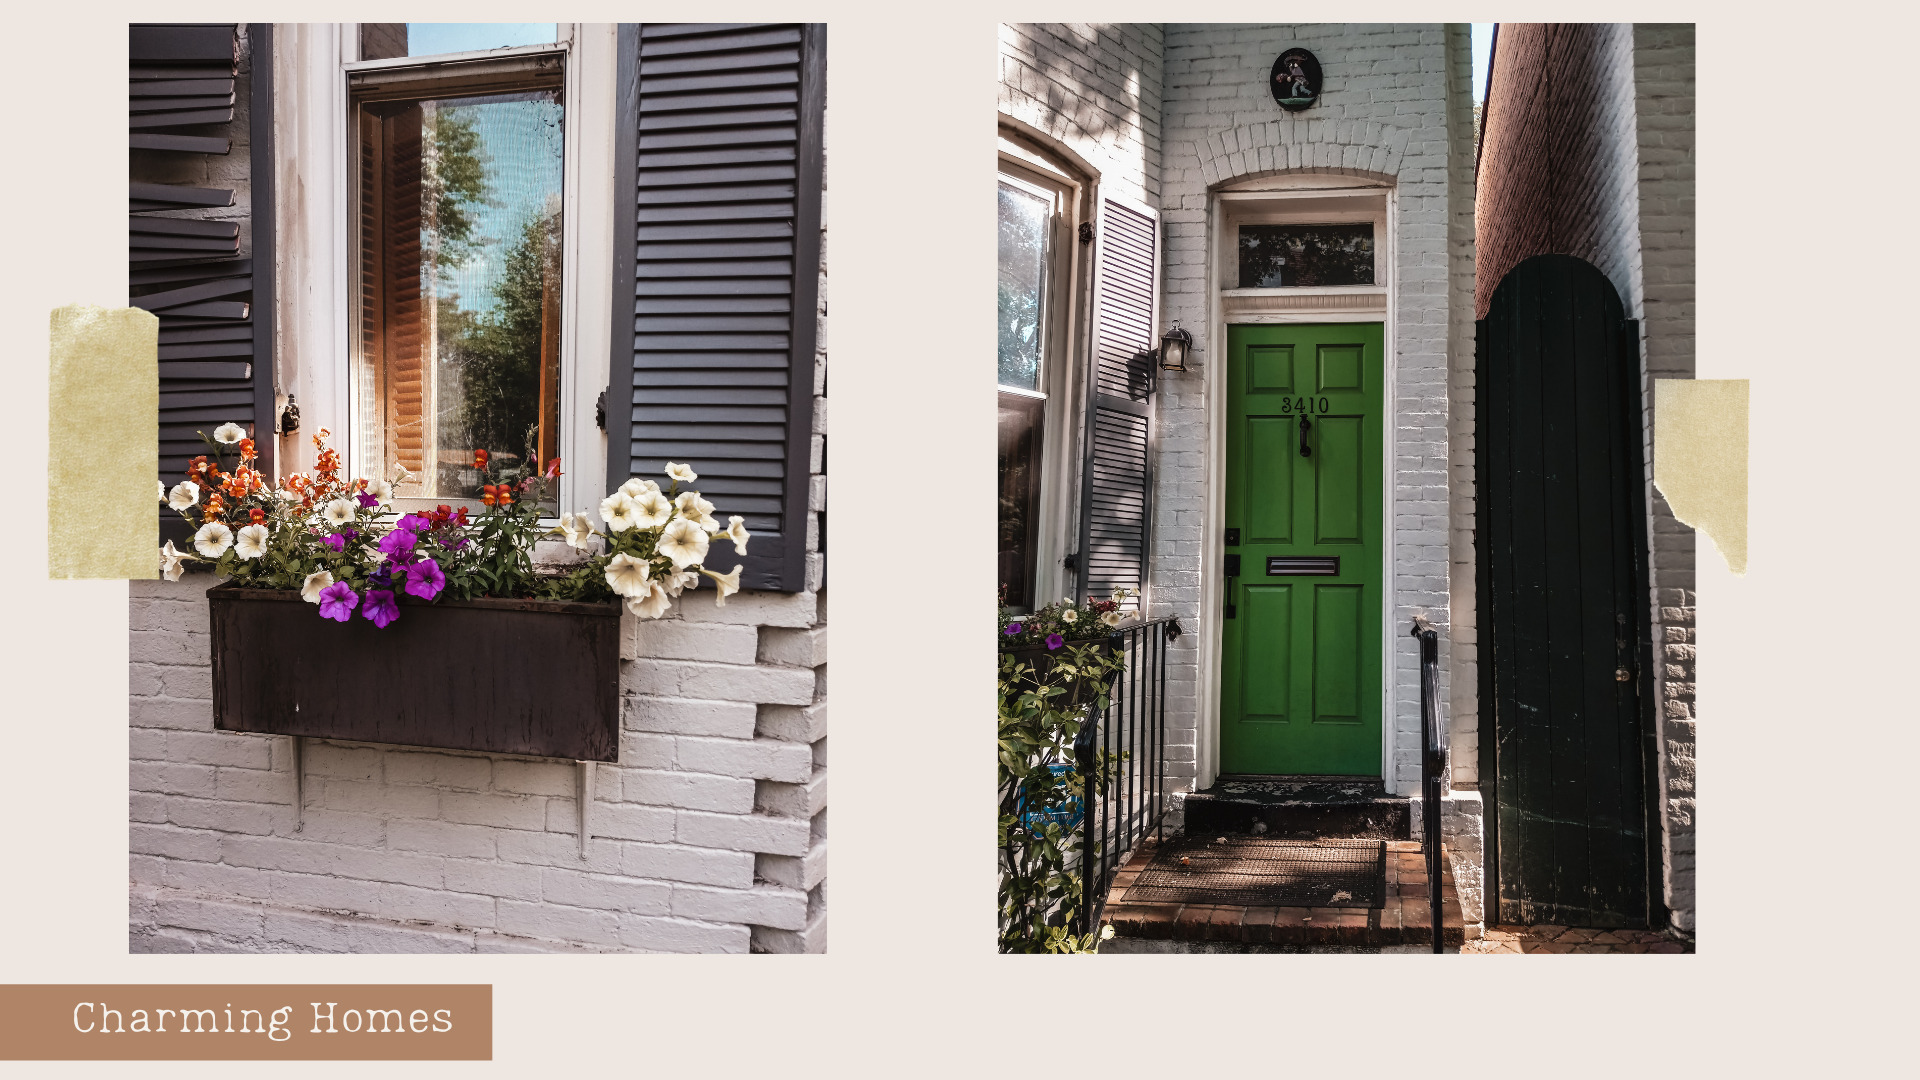 Image of homes in Georgetown DC, This Bahamian Gyal blog